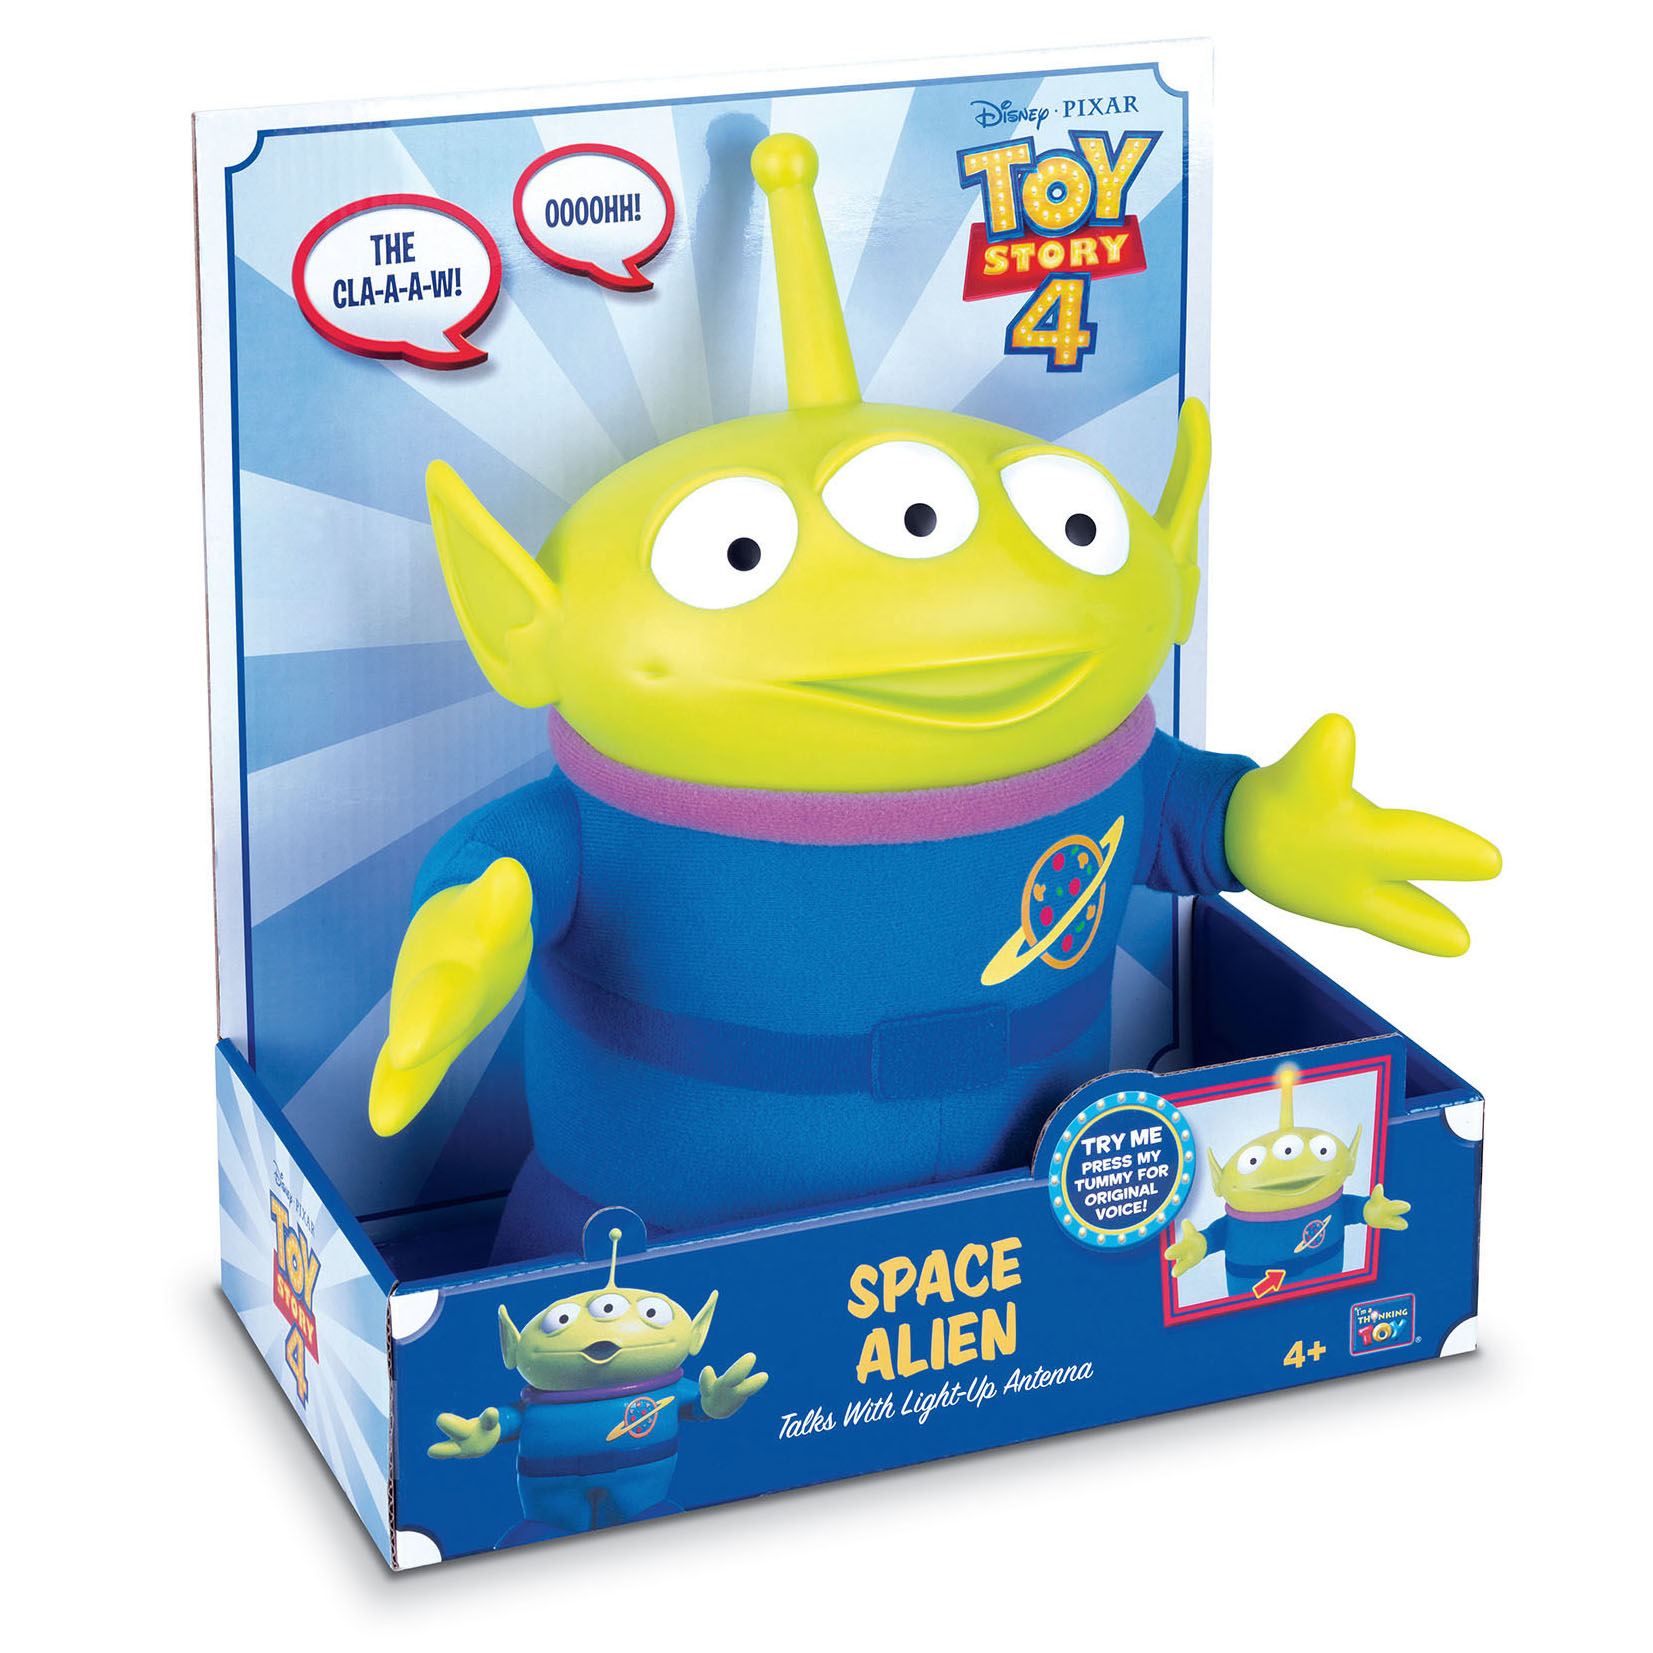 Disney Pixar Toy Story SPACE ALIEN Talks with Light-Up Antenna - image 4 of 5